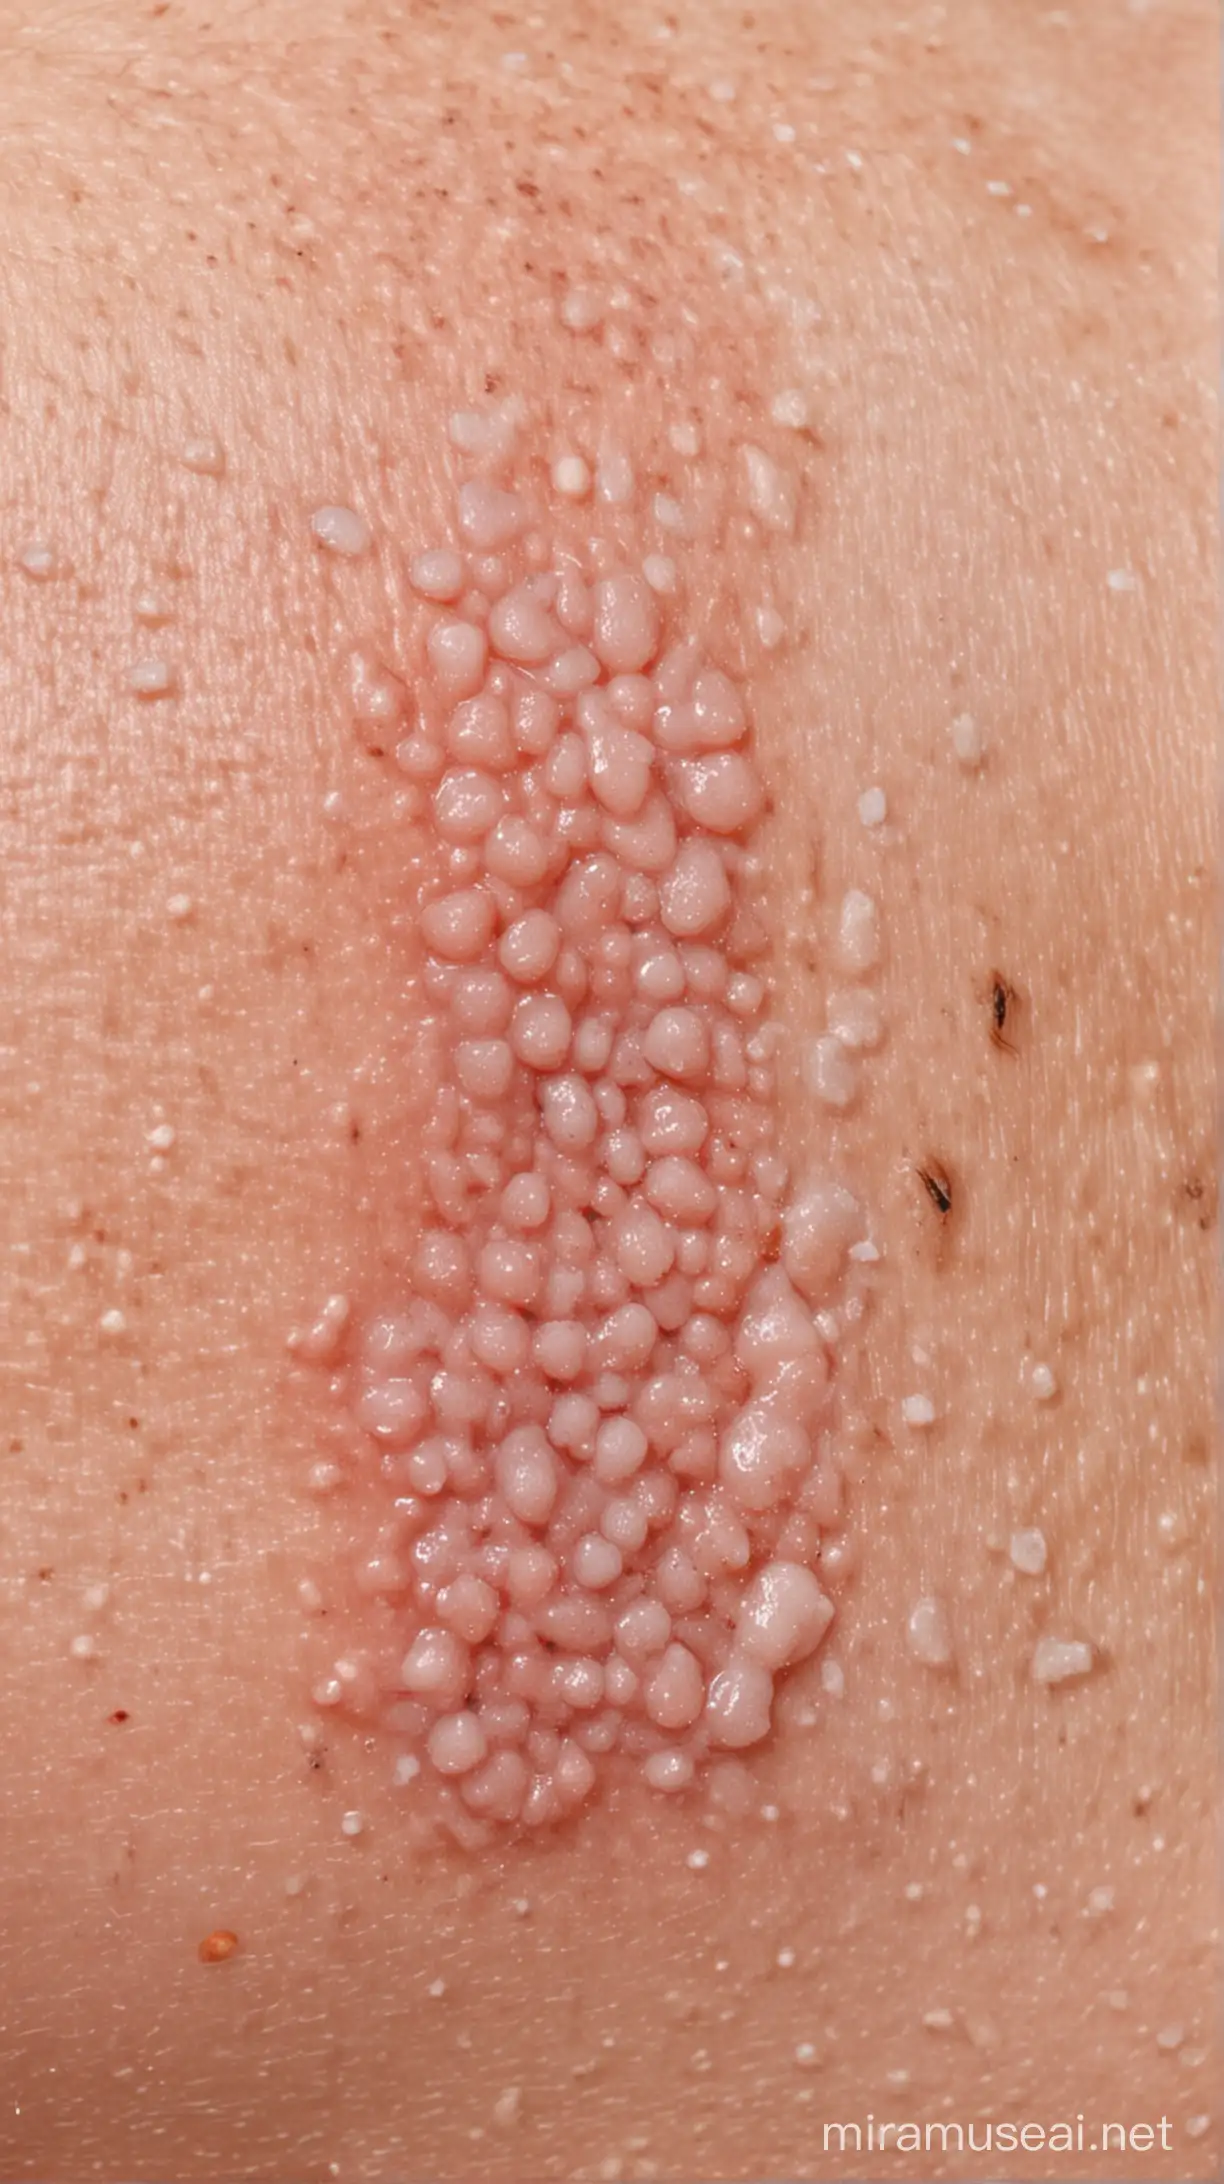 disgusting pimples on body